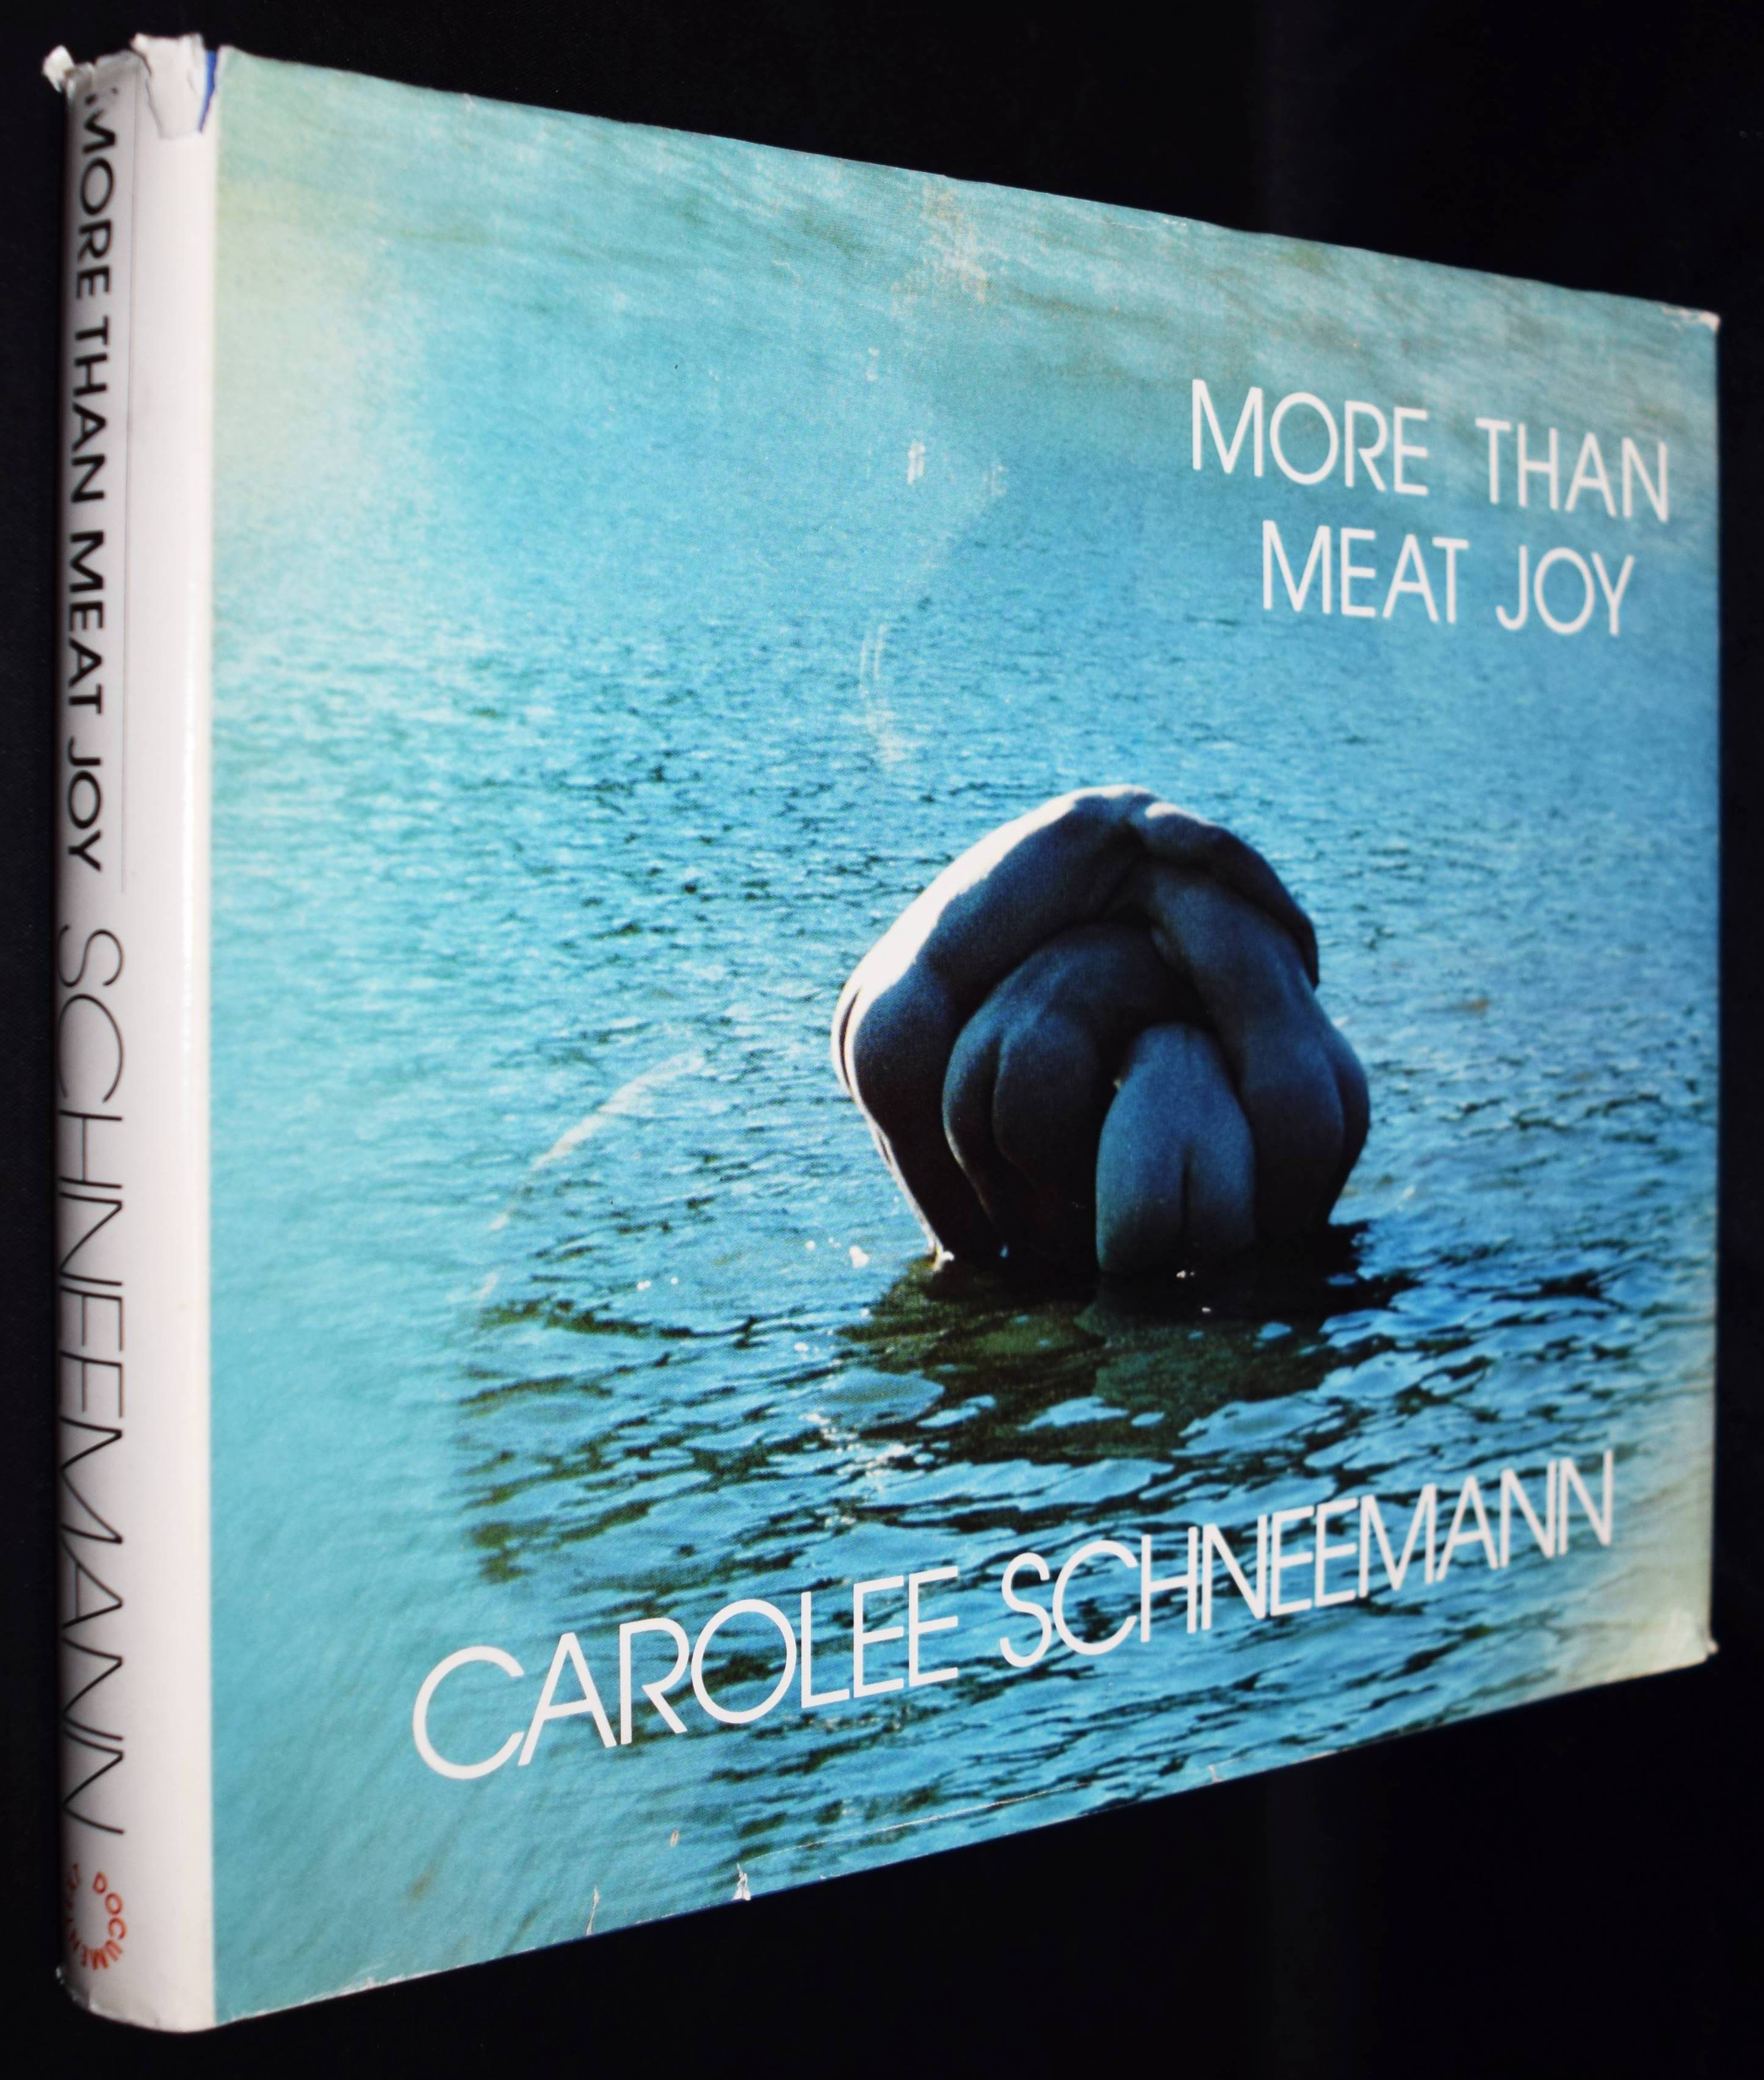 More than meat joy. Complete performance works and selected writings. Edited by Bruce McPherson. - Schneemann, Carolee.